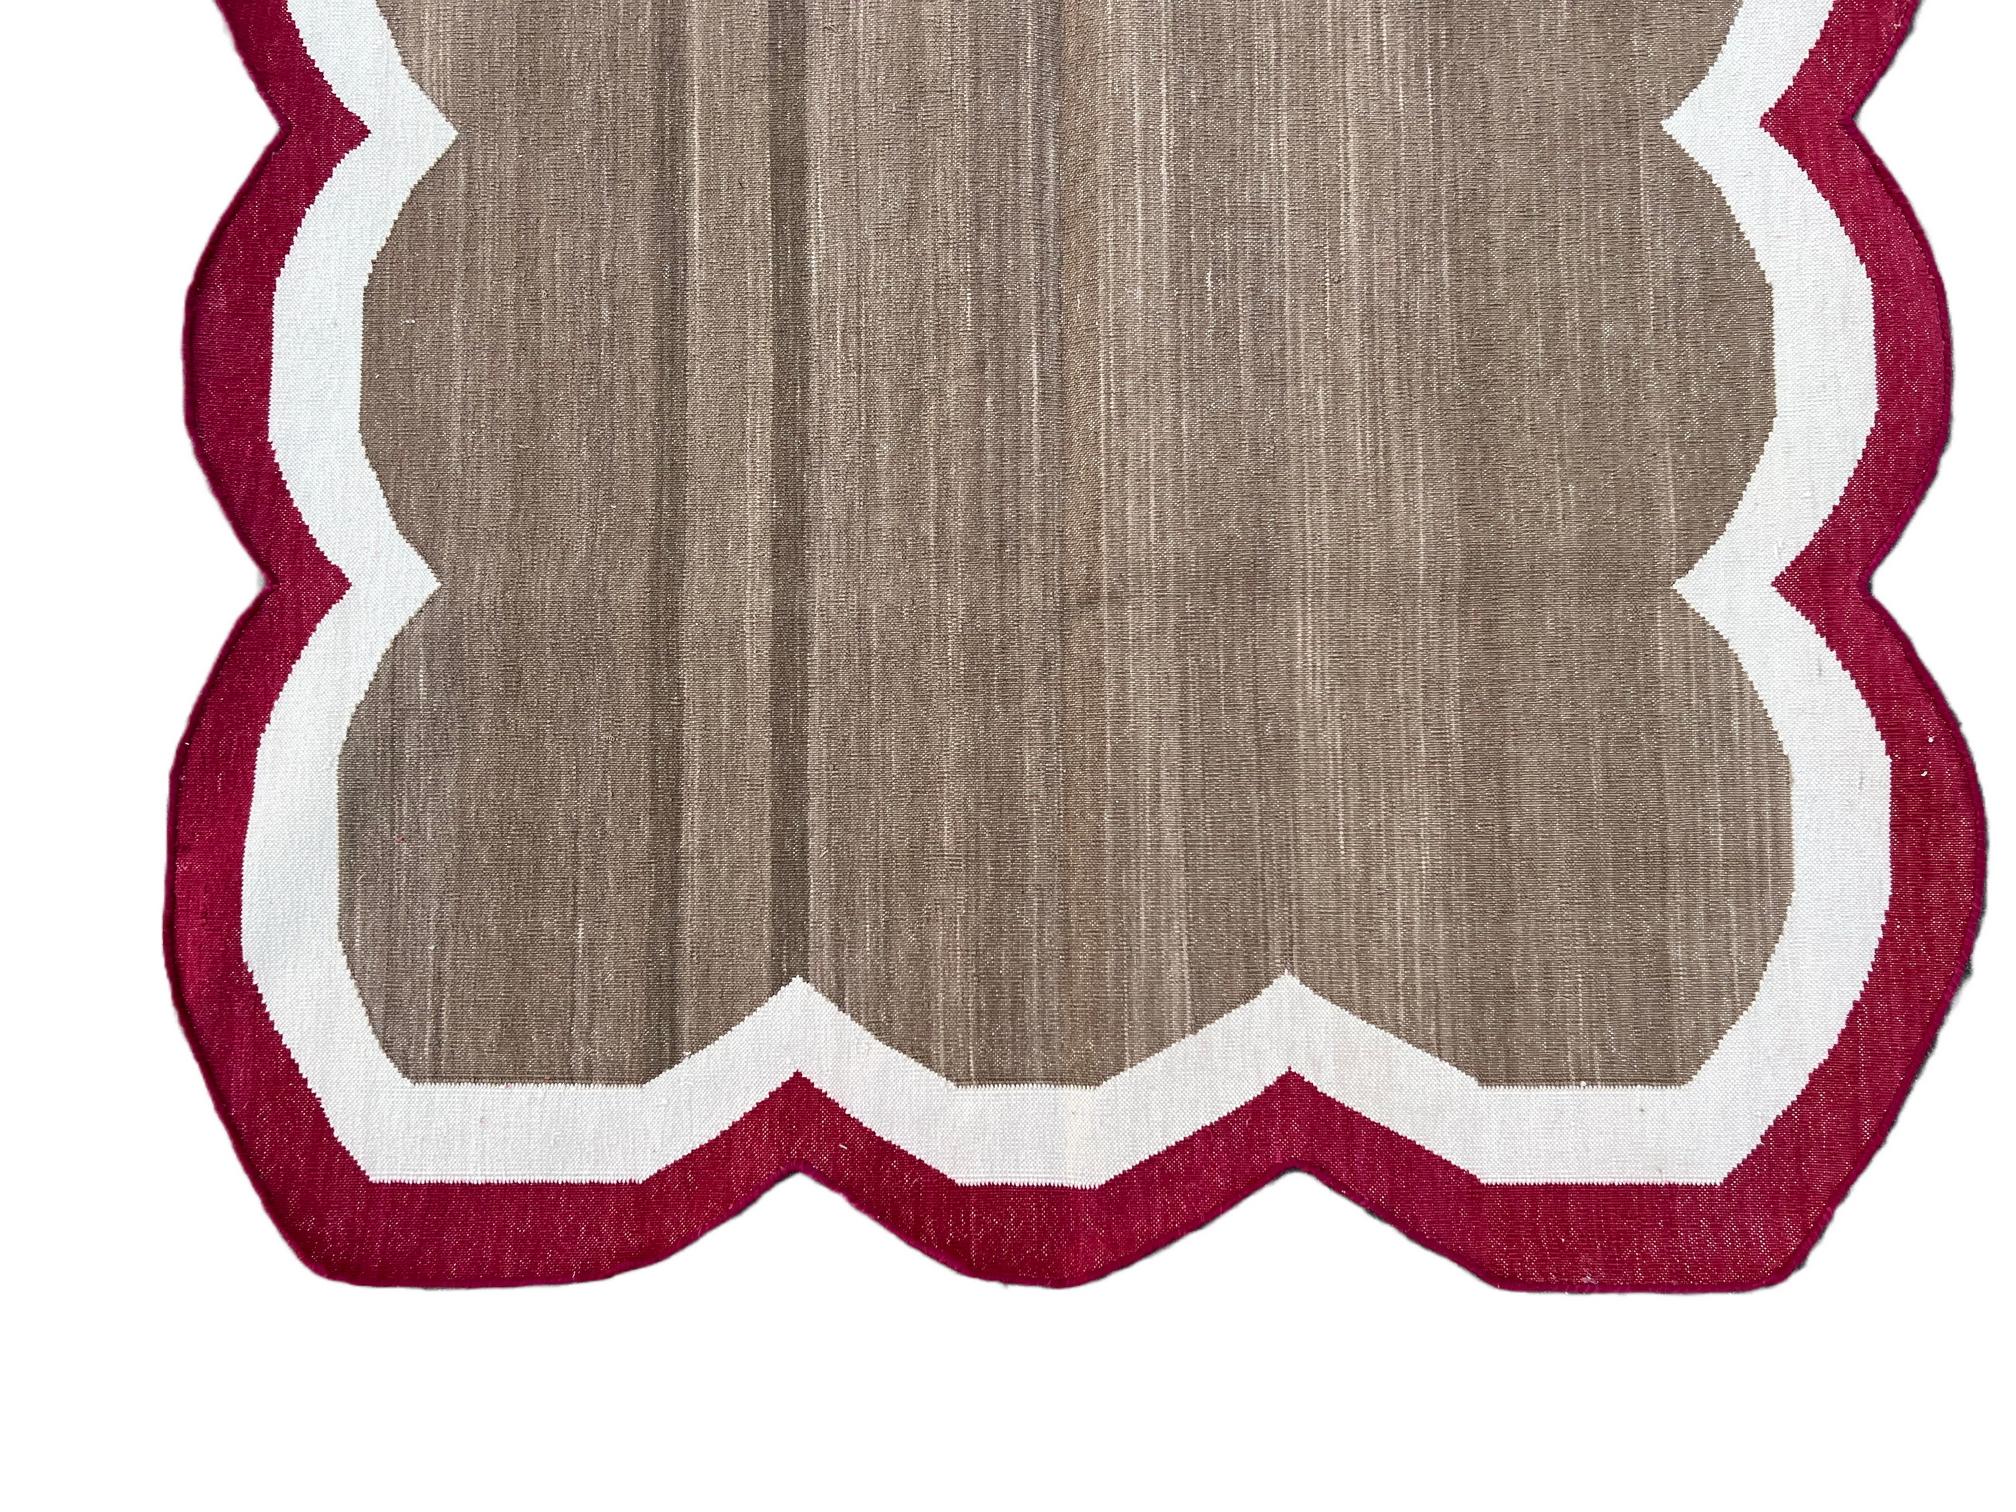 Hand-Woven Handmade Cotton Area Flat Weave Rug, 3x5 Brown And Red Scalloped Kilim Dhurrie For Sale